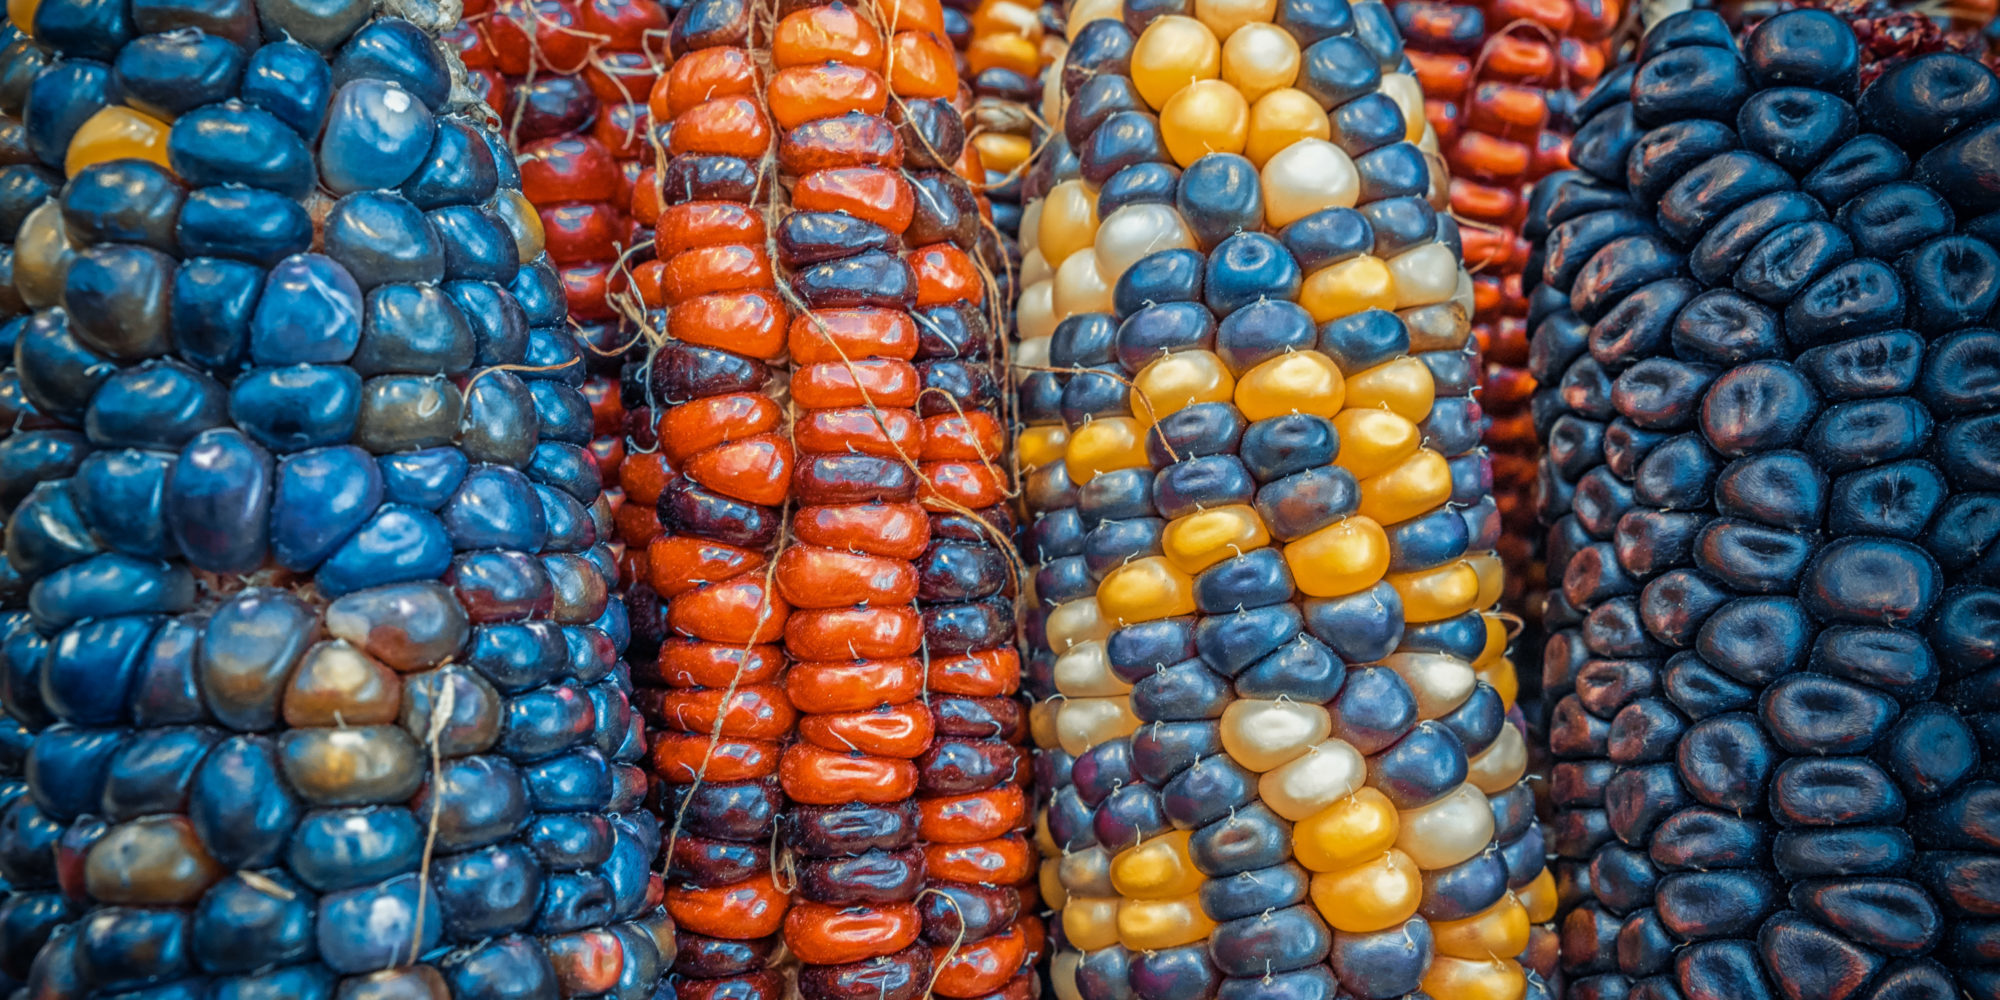 Organic Corn Prices Consolidate As Traders Await the Harvest